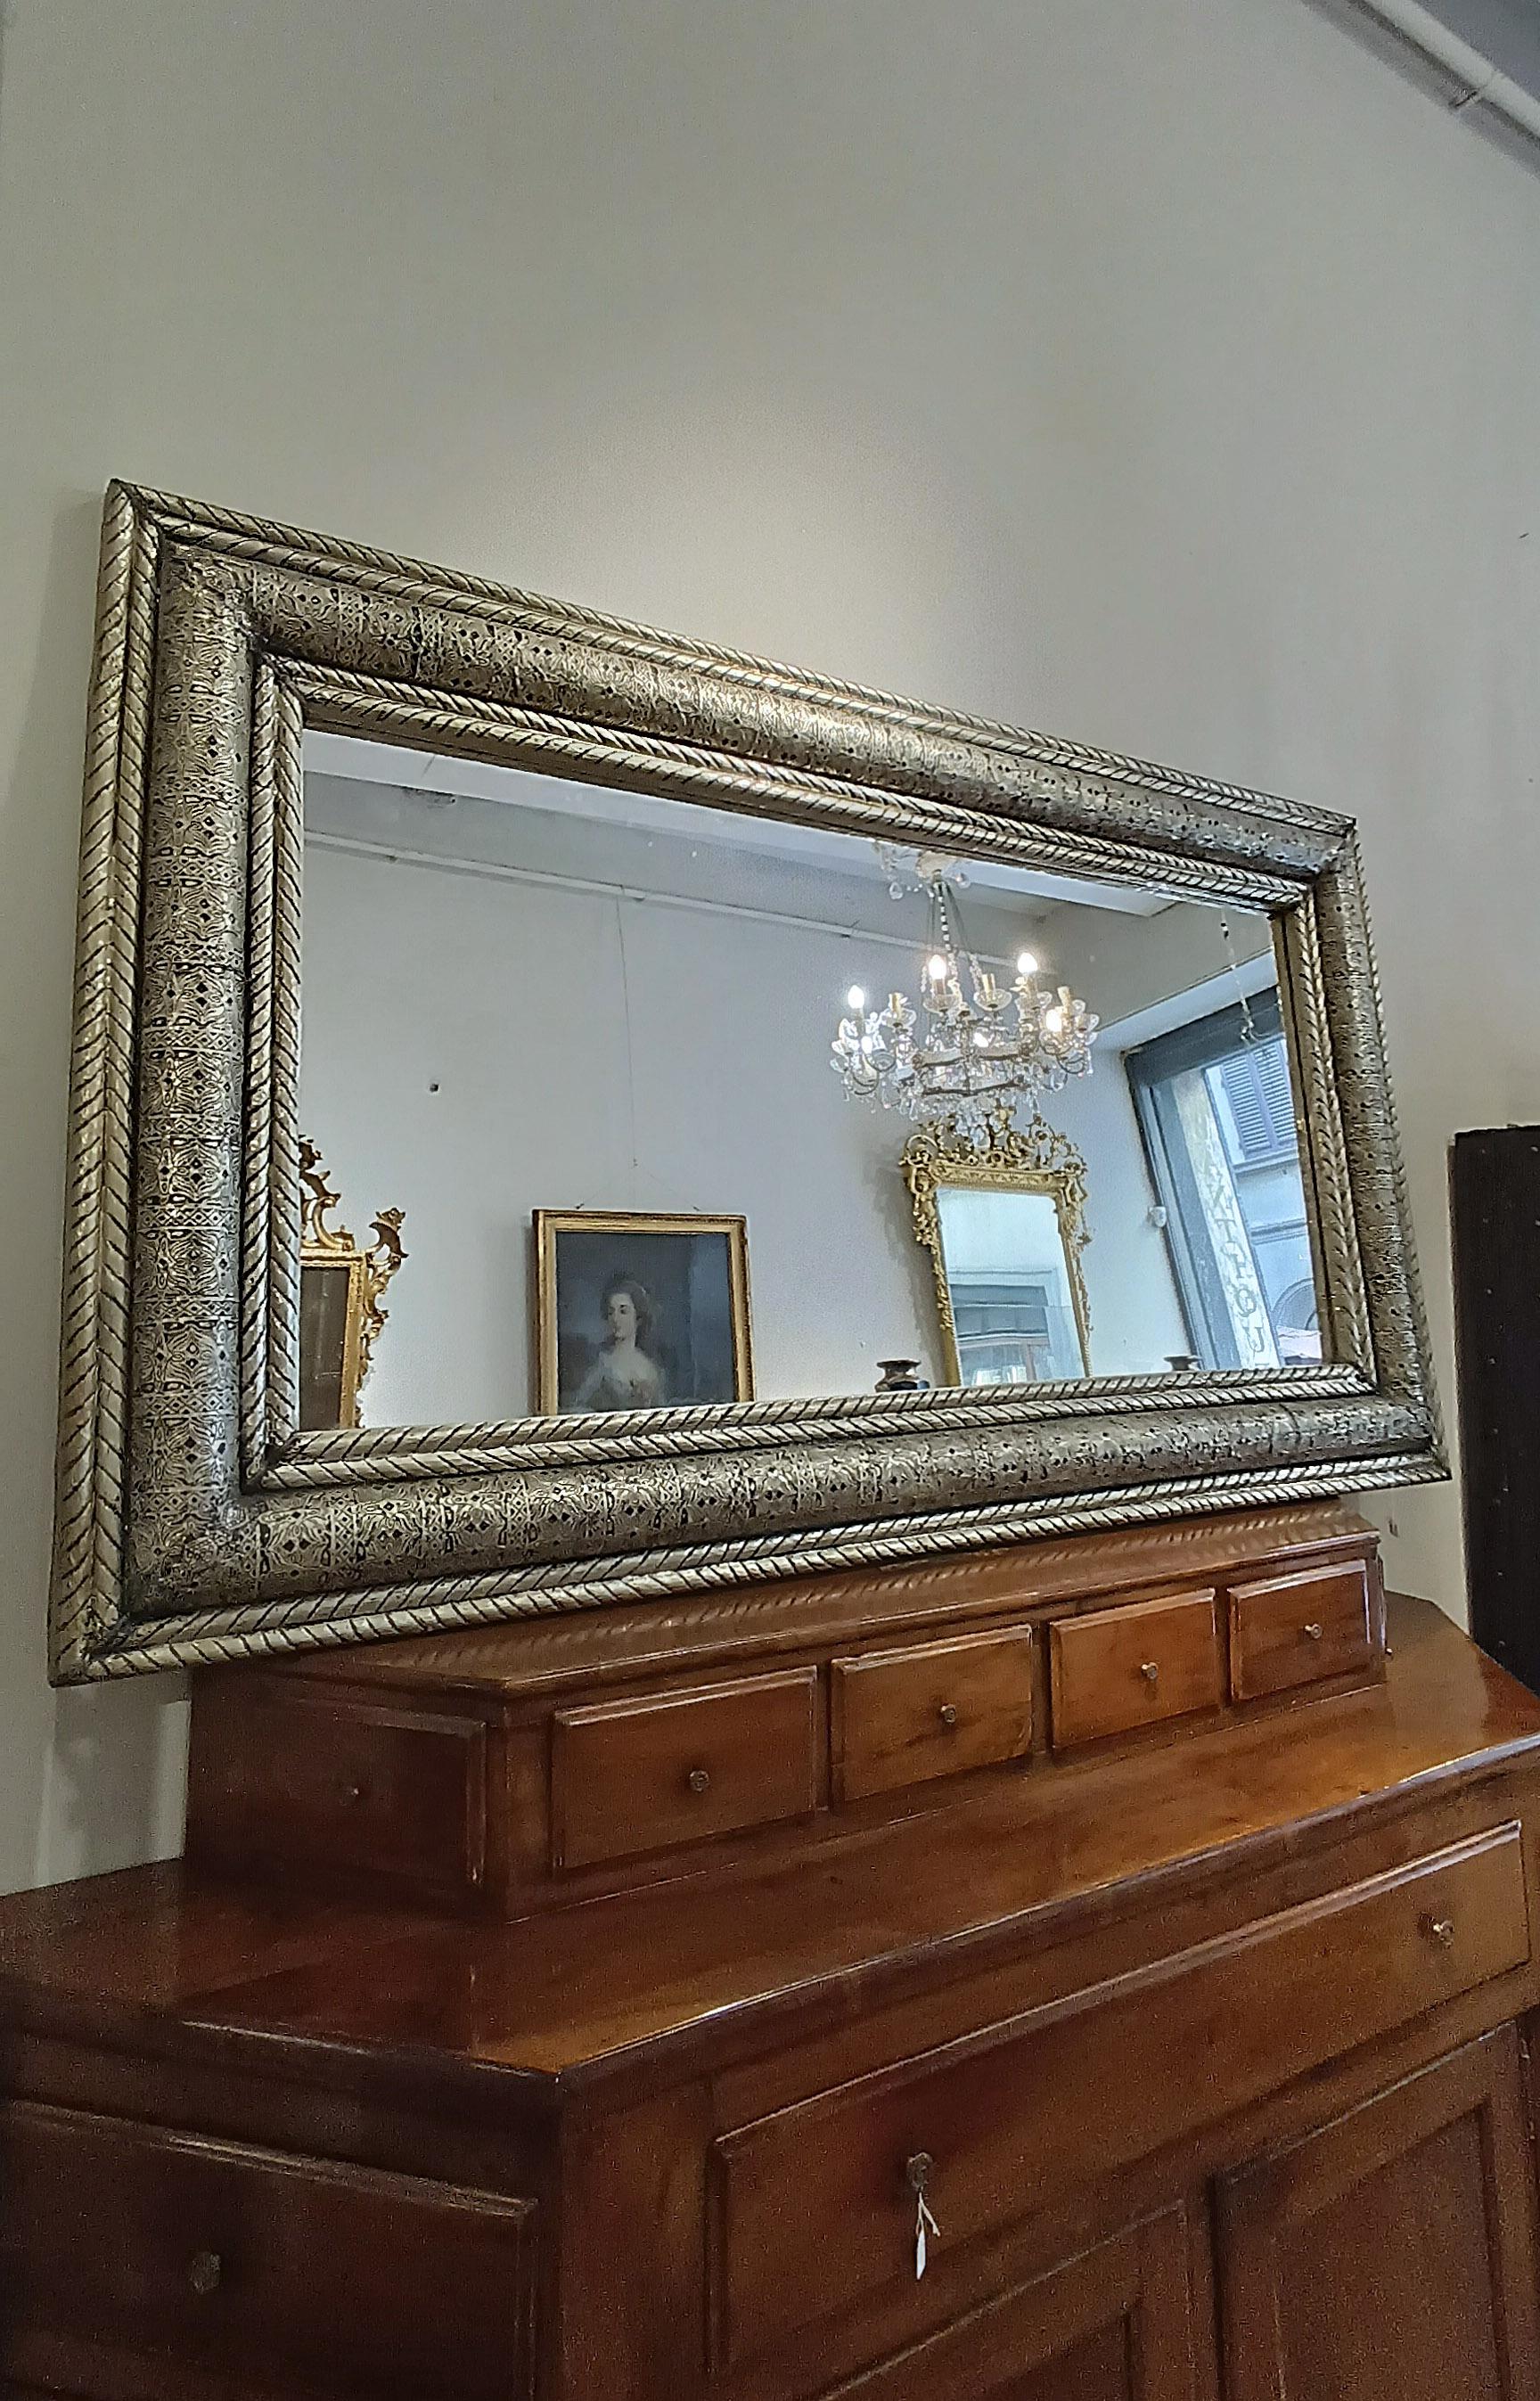 END OF THE 19th CENTURY LARGE SILVER-PLATED COPPER MIRROR  For Sale 2